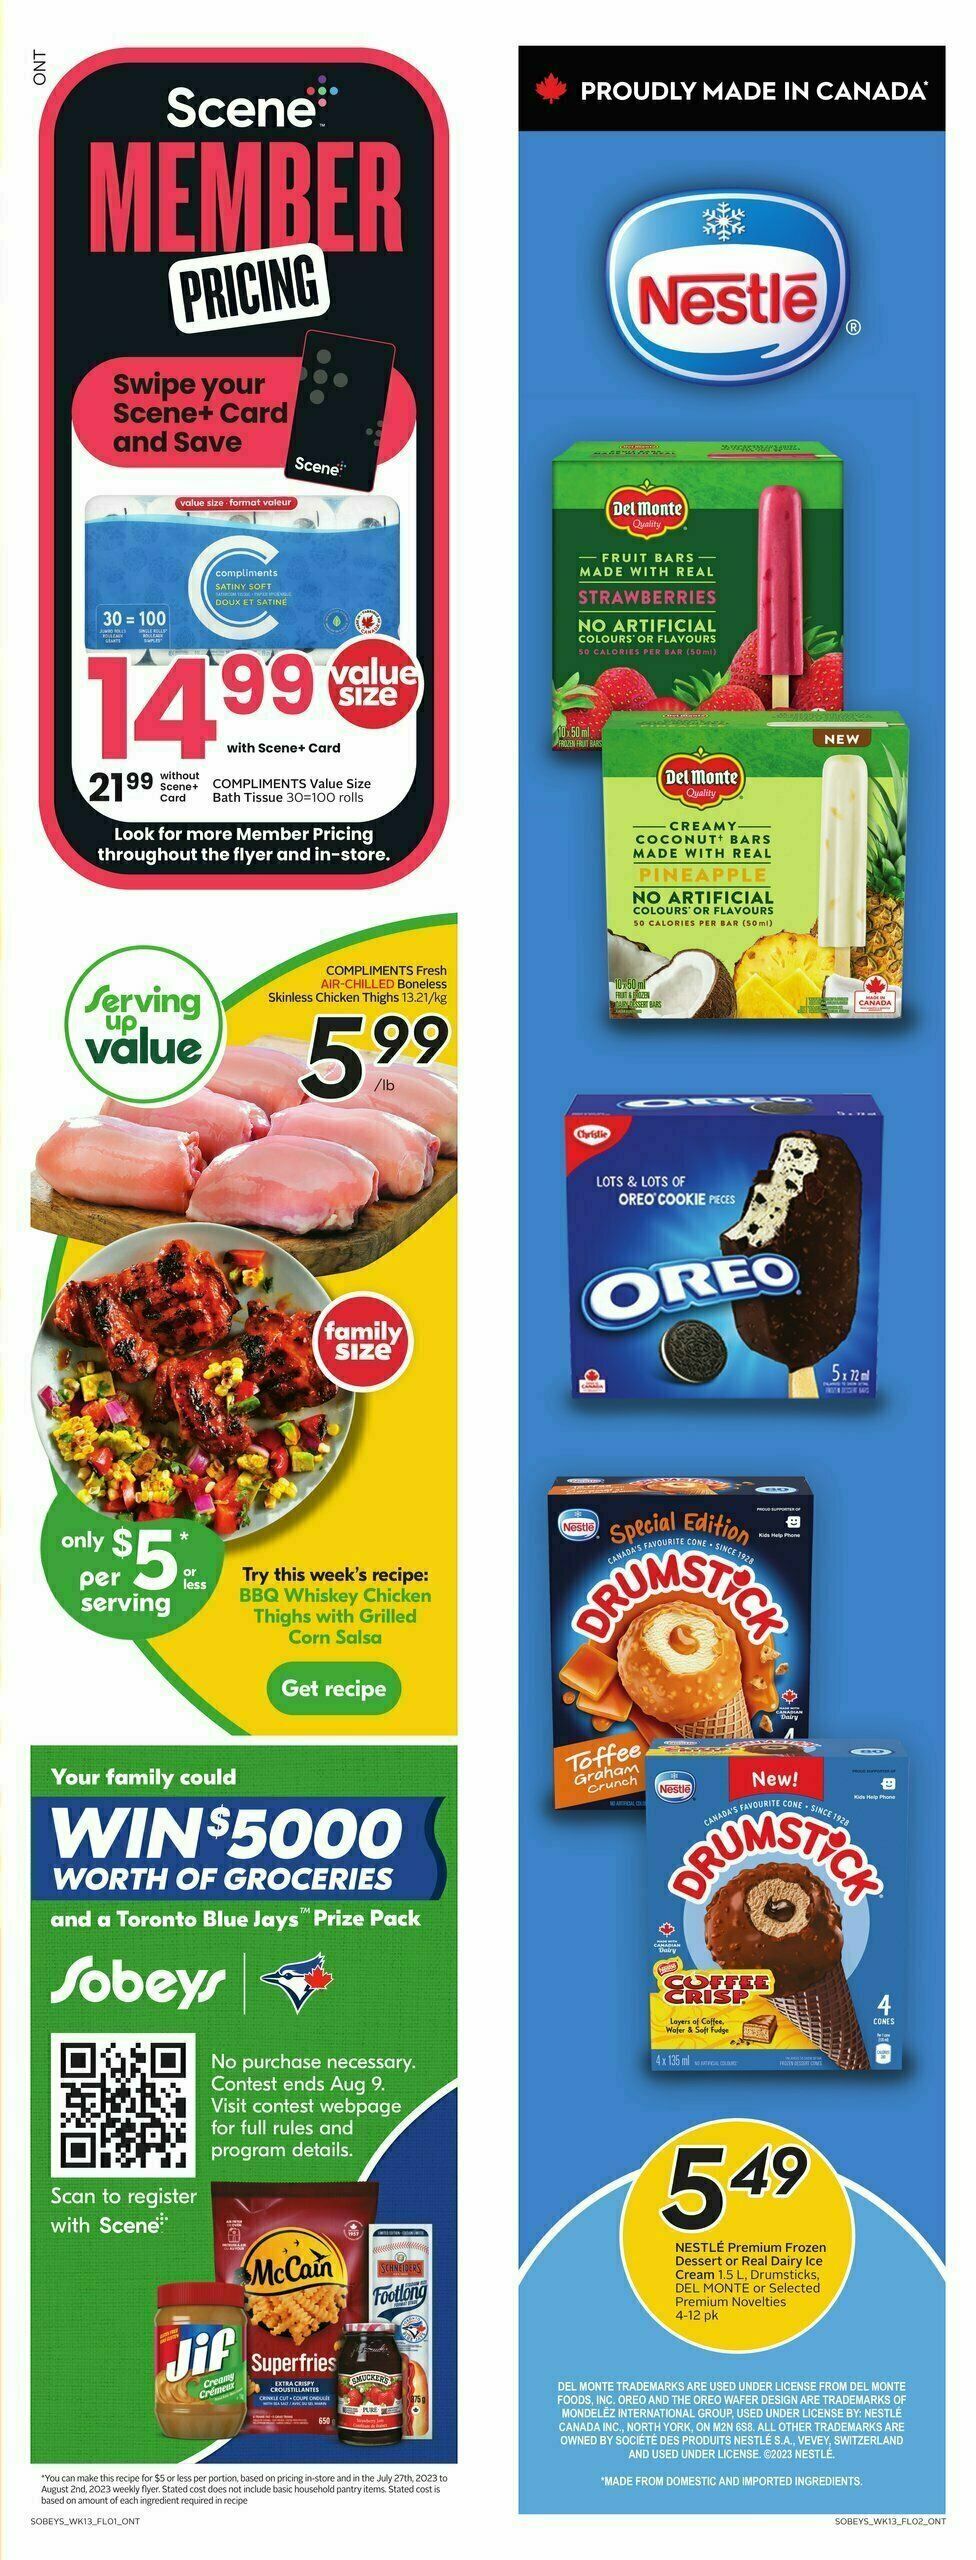 Sobeys Flyer from July 27